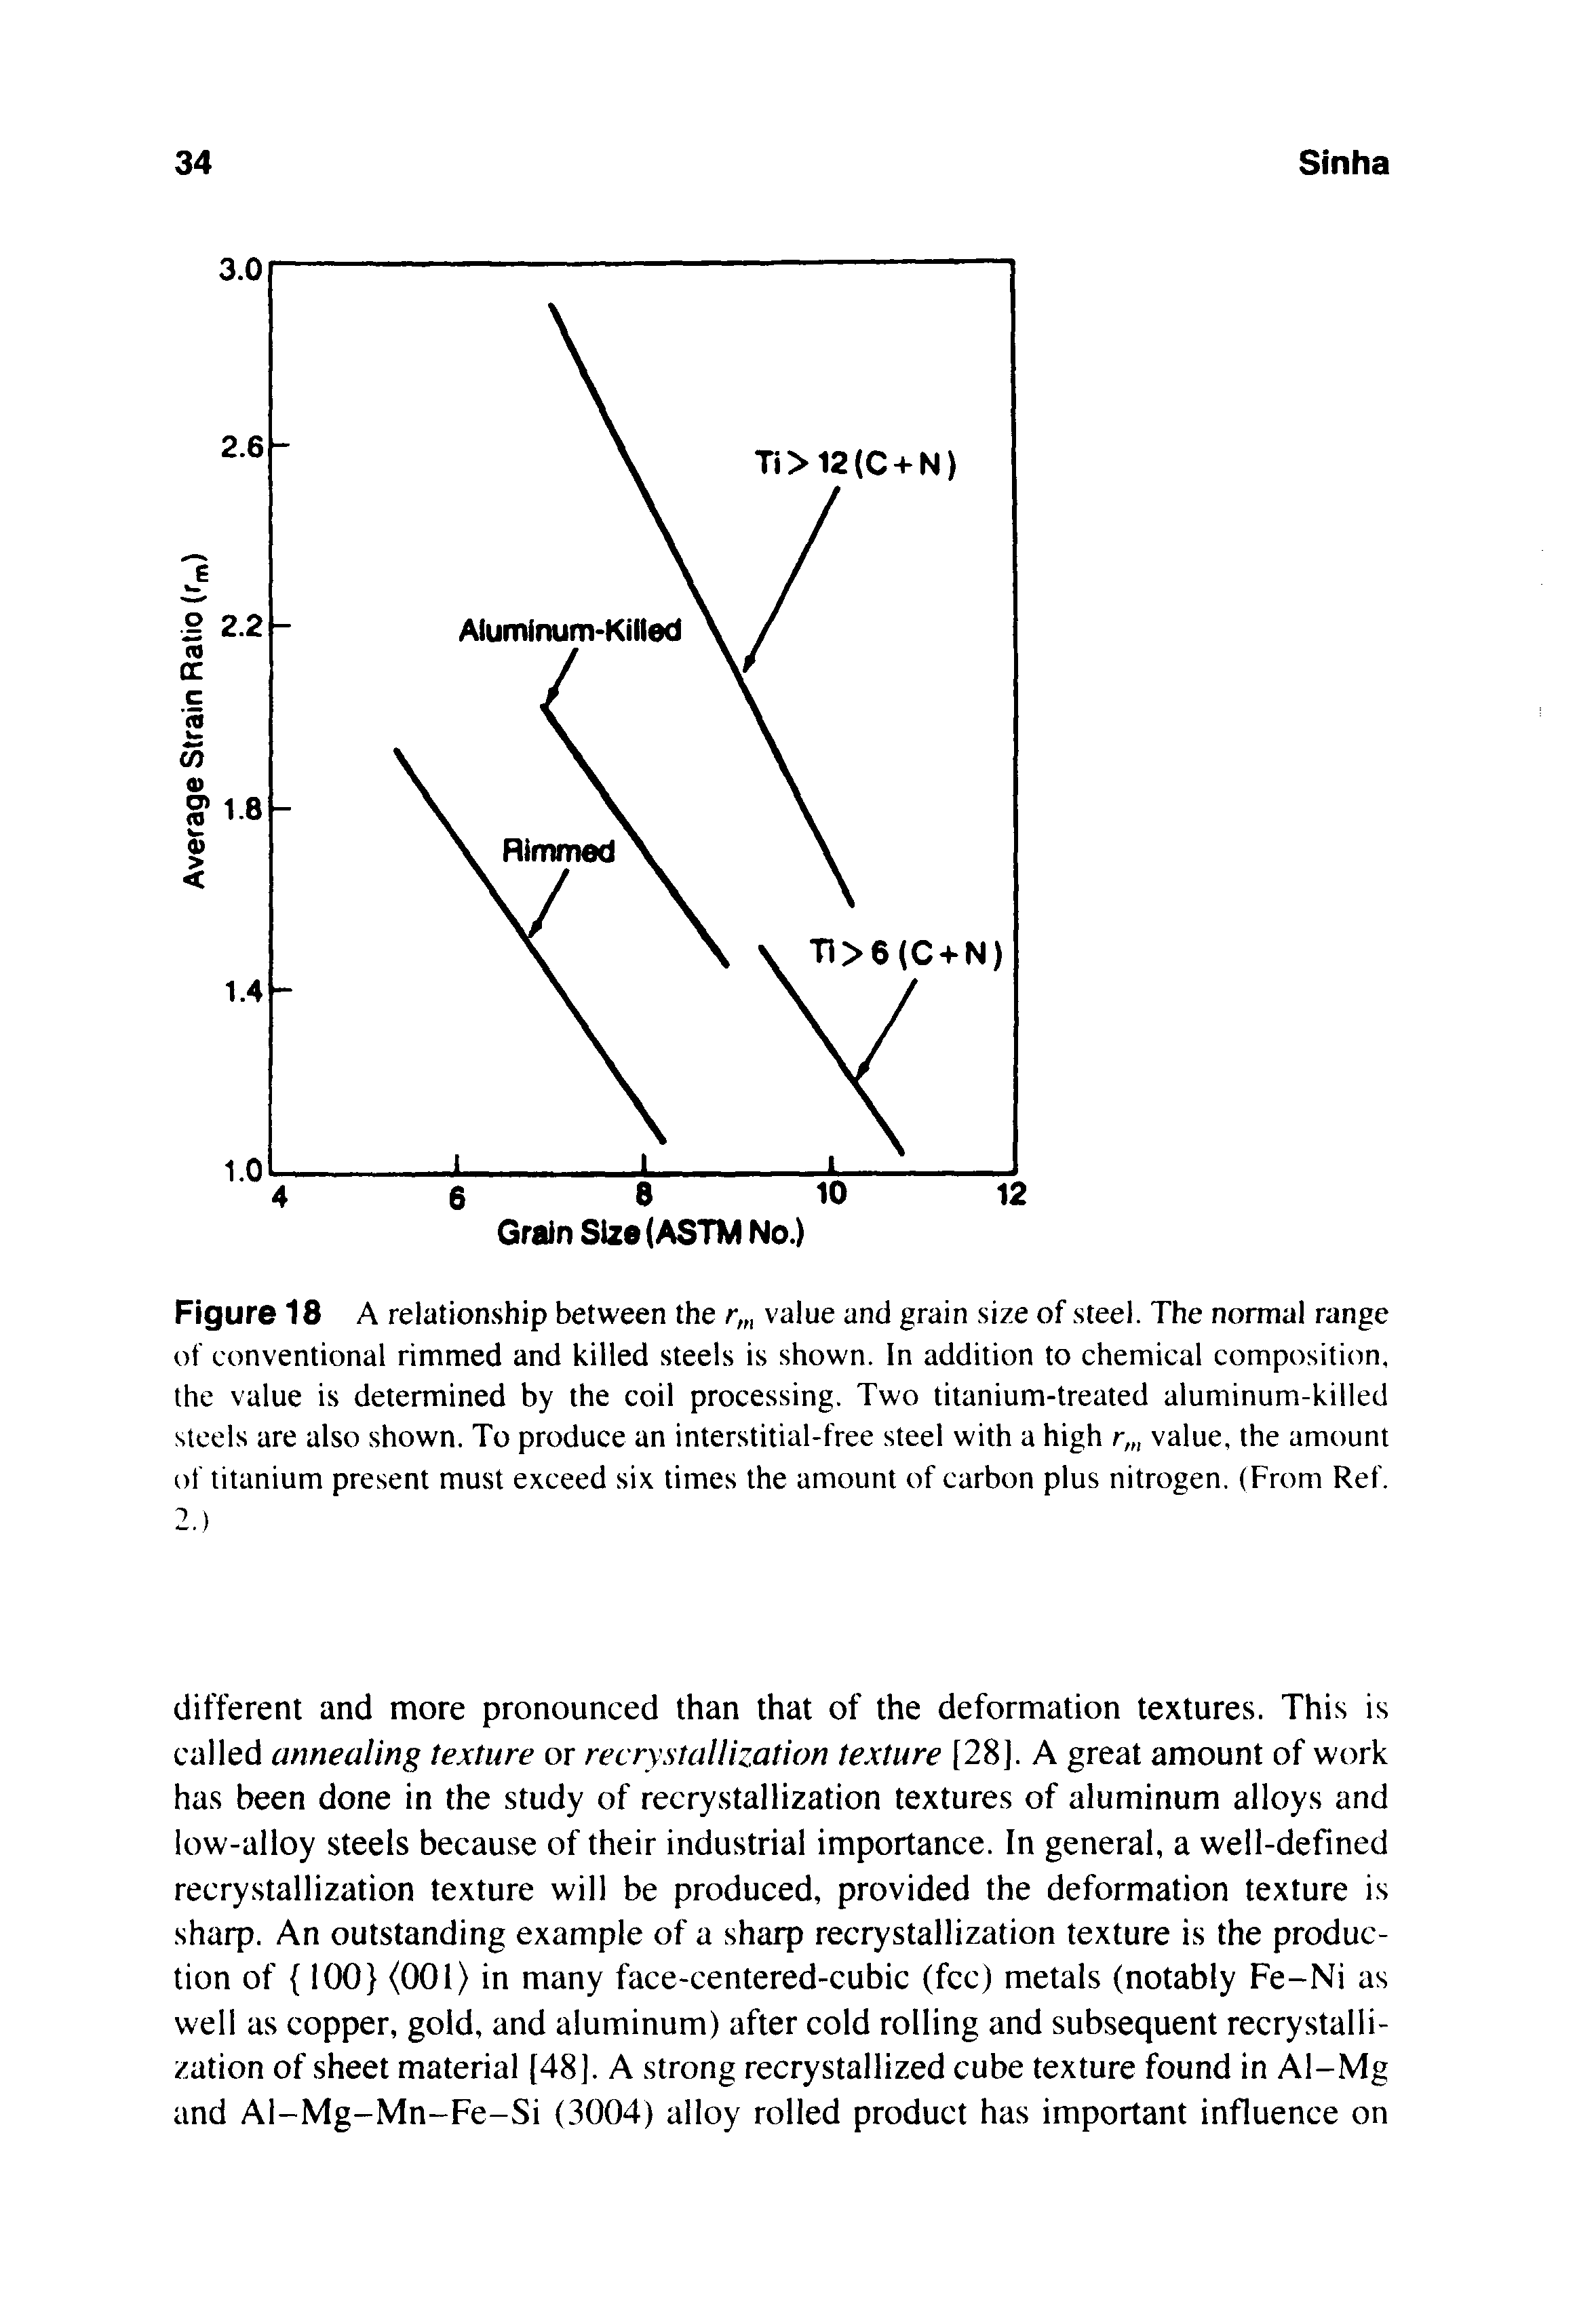 Figure 18 A relationship between the value and grain size of steel. The normal range of conventional rimmed and killed steels is shown. In addition to chemical composition, the value is determined by the coil processing. Two titanium-treated aluminum-killed steels are also shown. To produce an interstitial-free steel with a high r , value, the amount t)f titanium present must exceed six times the amount of carbon plus nitrogen. (From Ref.